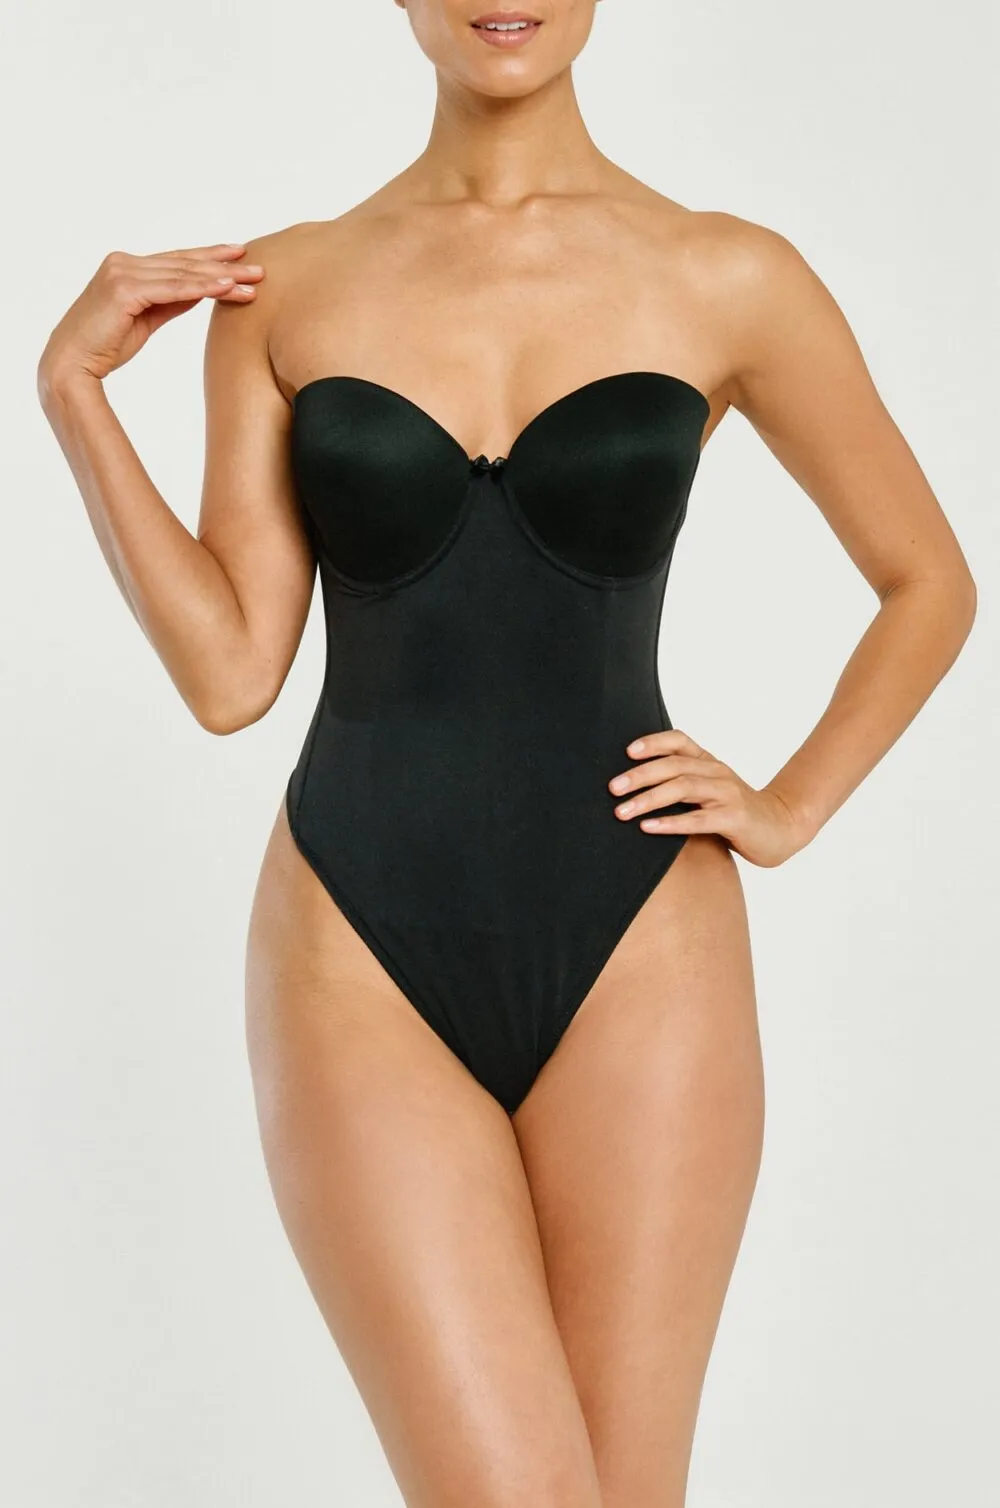 Elevate Your Elegance: The Essential Shapewear Guide for 2024 Brides